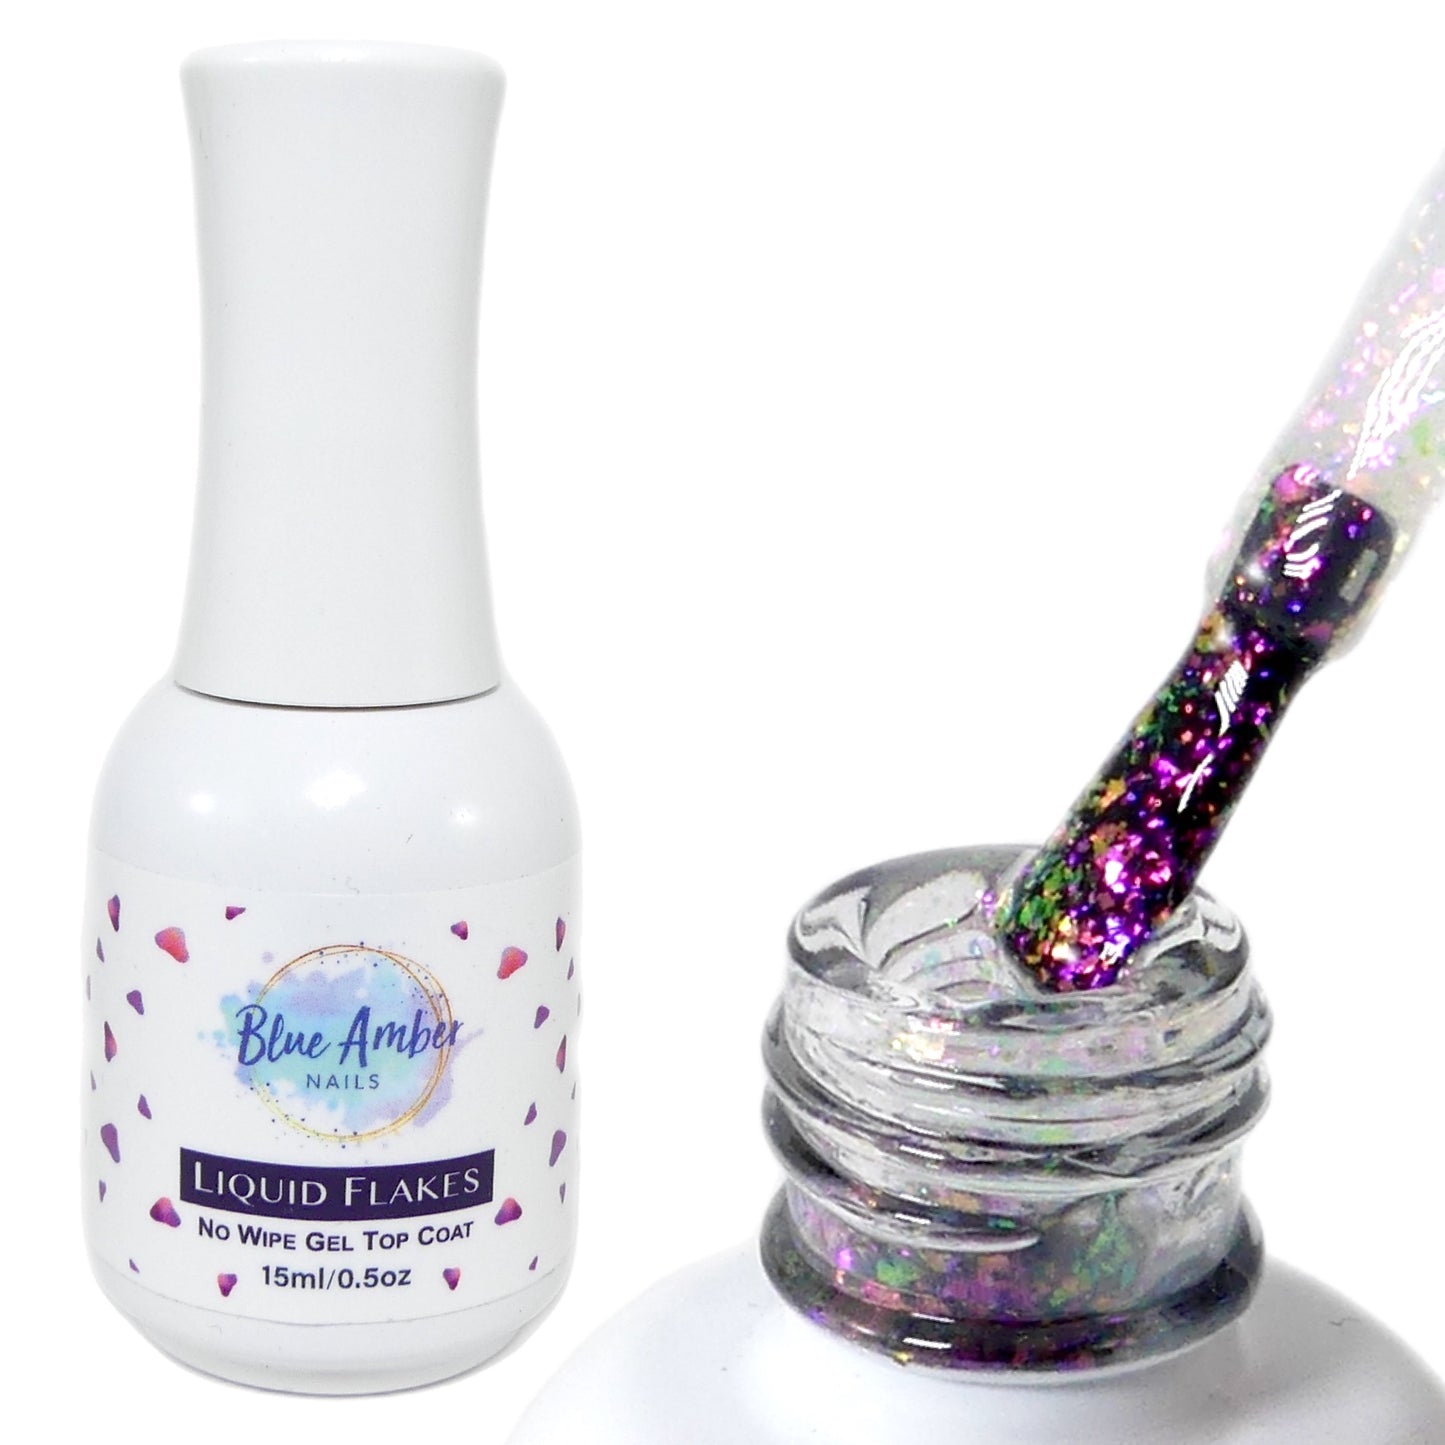 Load image into Gallery viewer, Liquid Flakes No Wipe Gel Top Coat #4 - My Little Nail Art Shop
